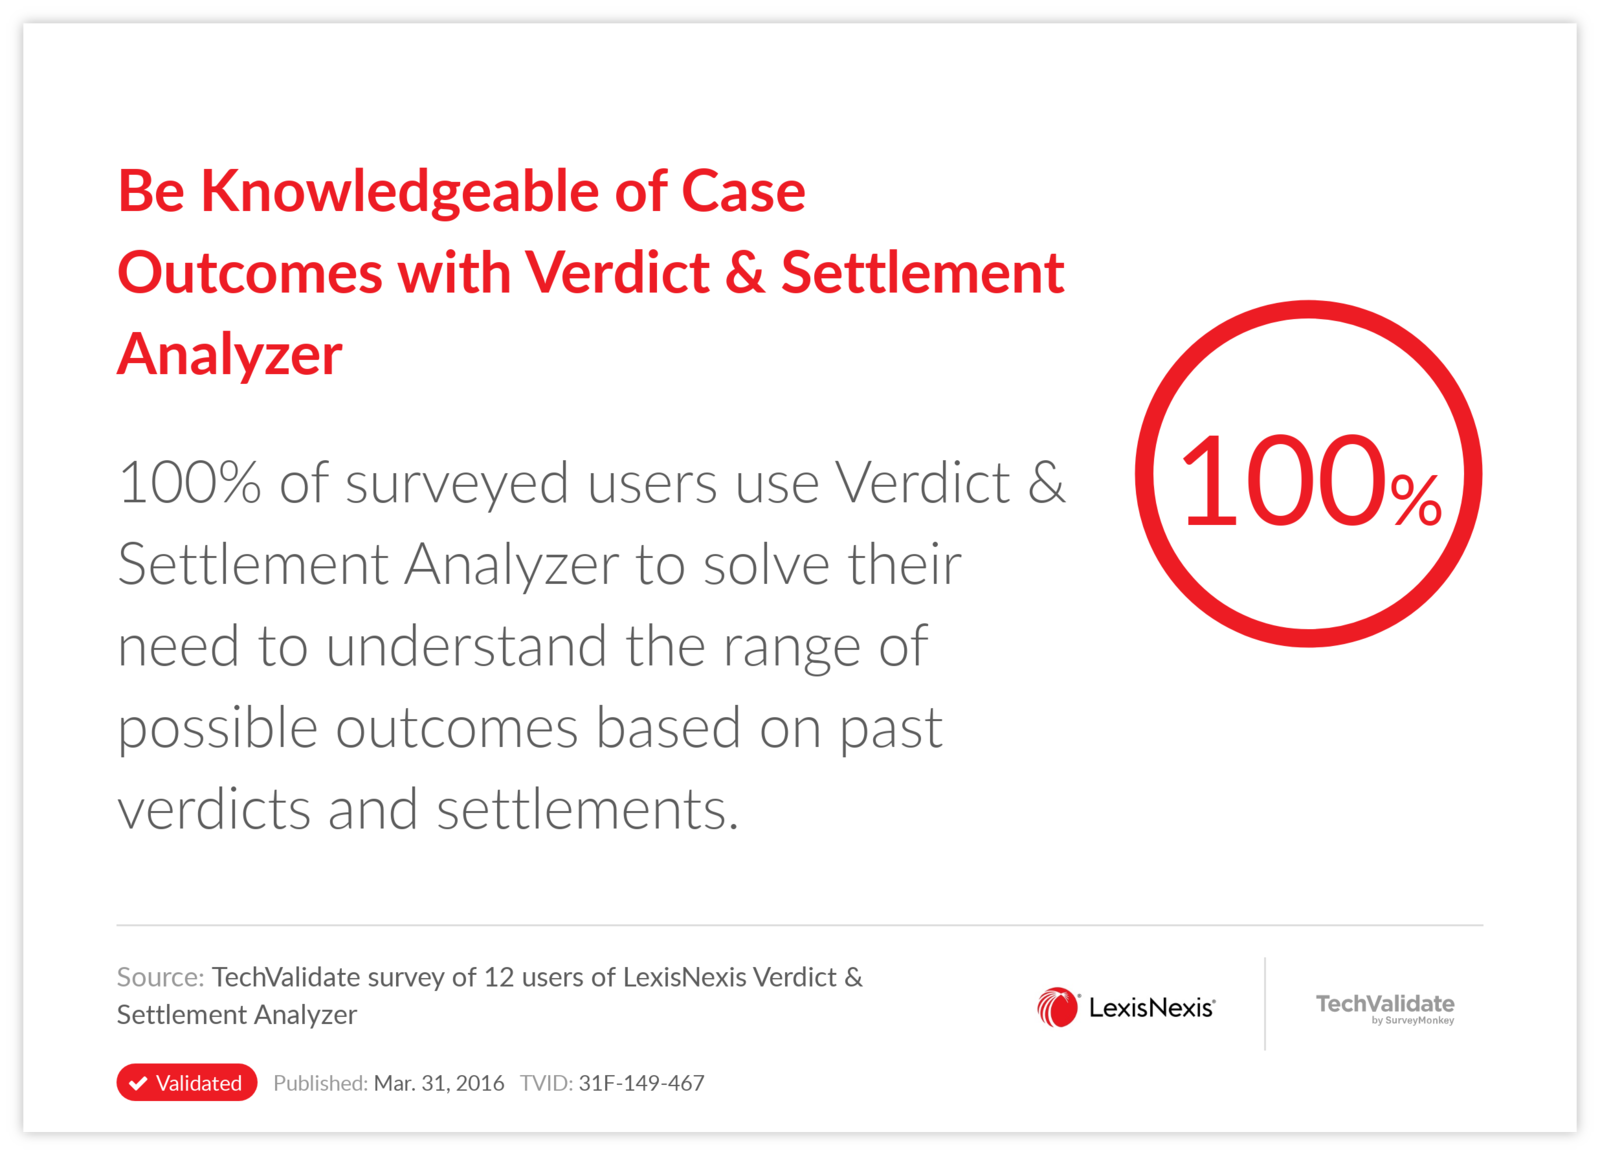 Be Knowledgeable of Case Outcomes with Verdict & Settlement Analyzer